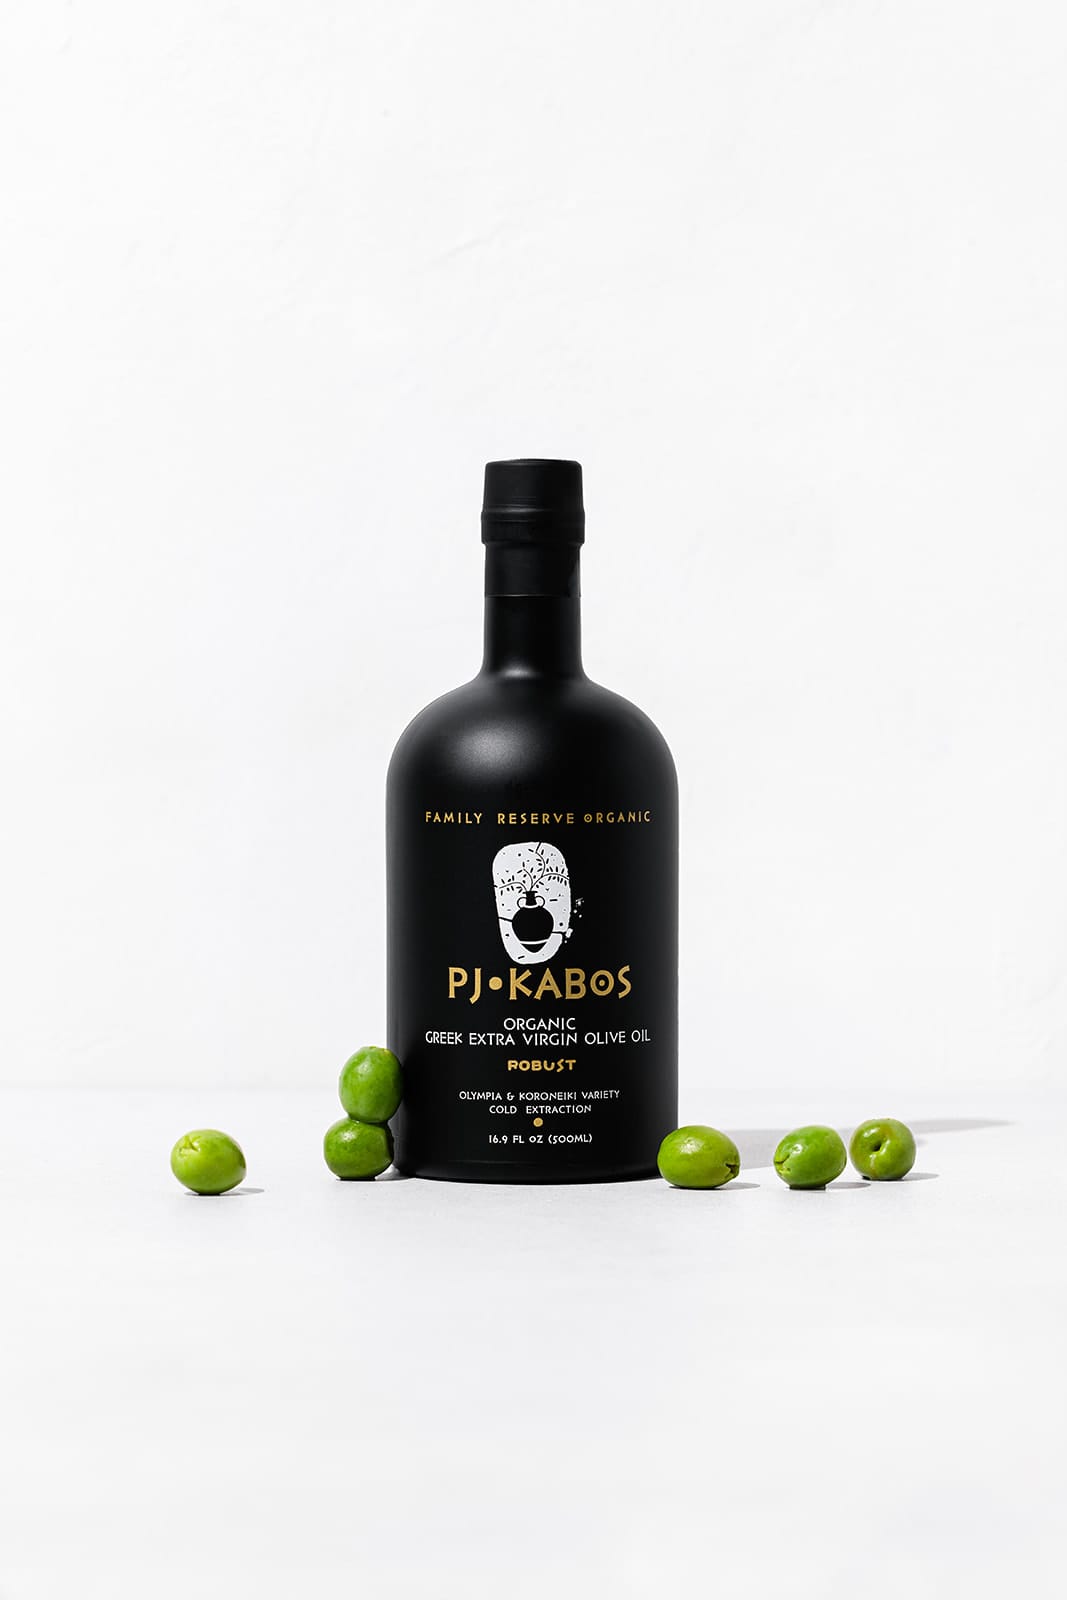 An elegant black bottle of PJ Kabos very high-phenolic robust and organic extra virgin olive oil with olives scattered around it.